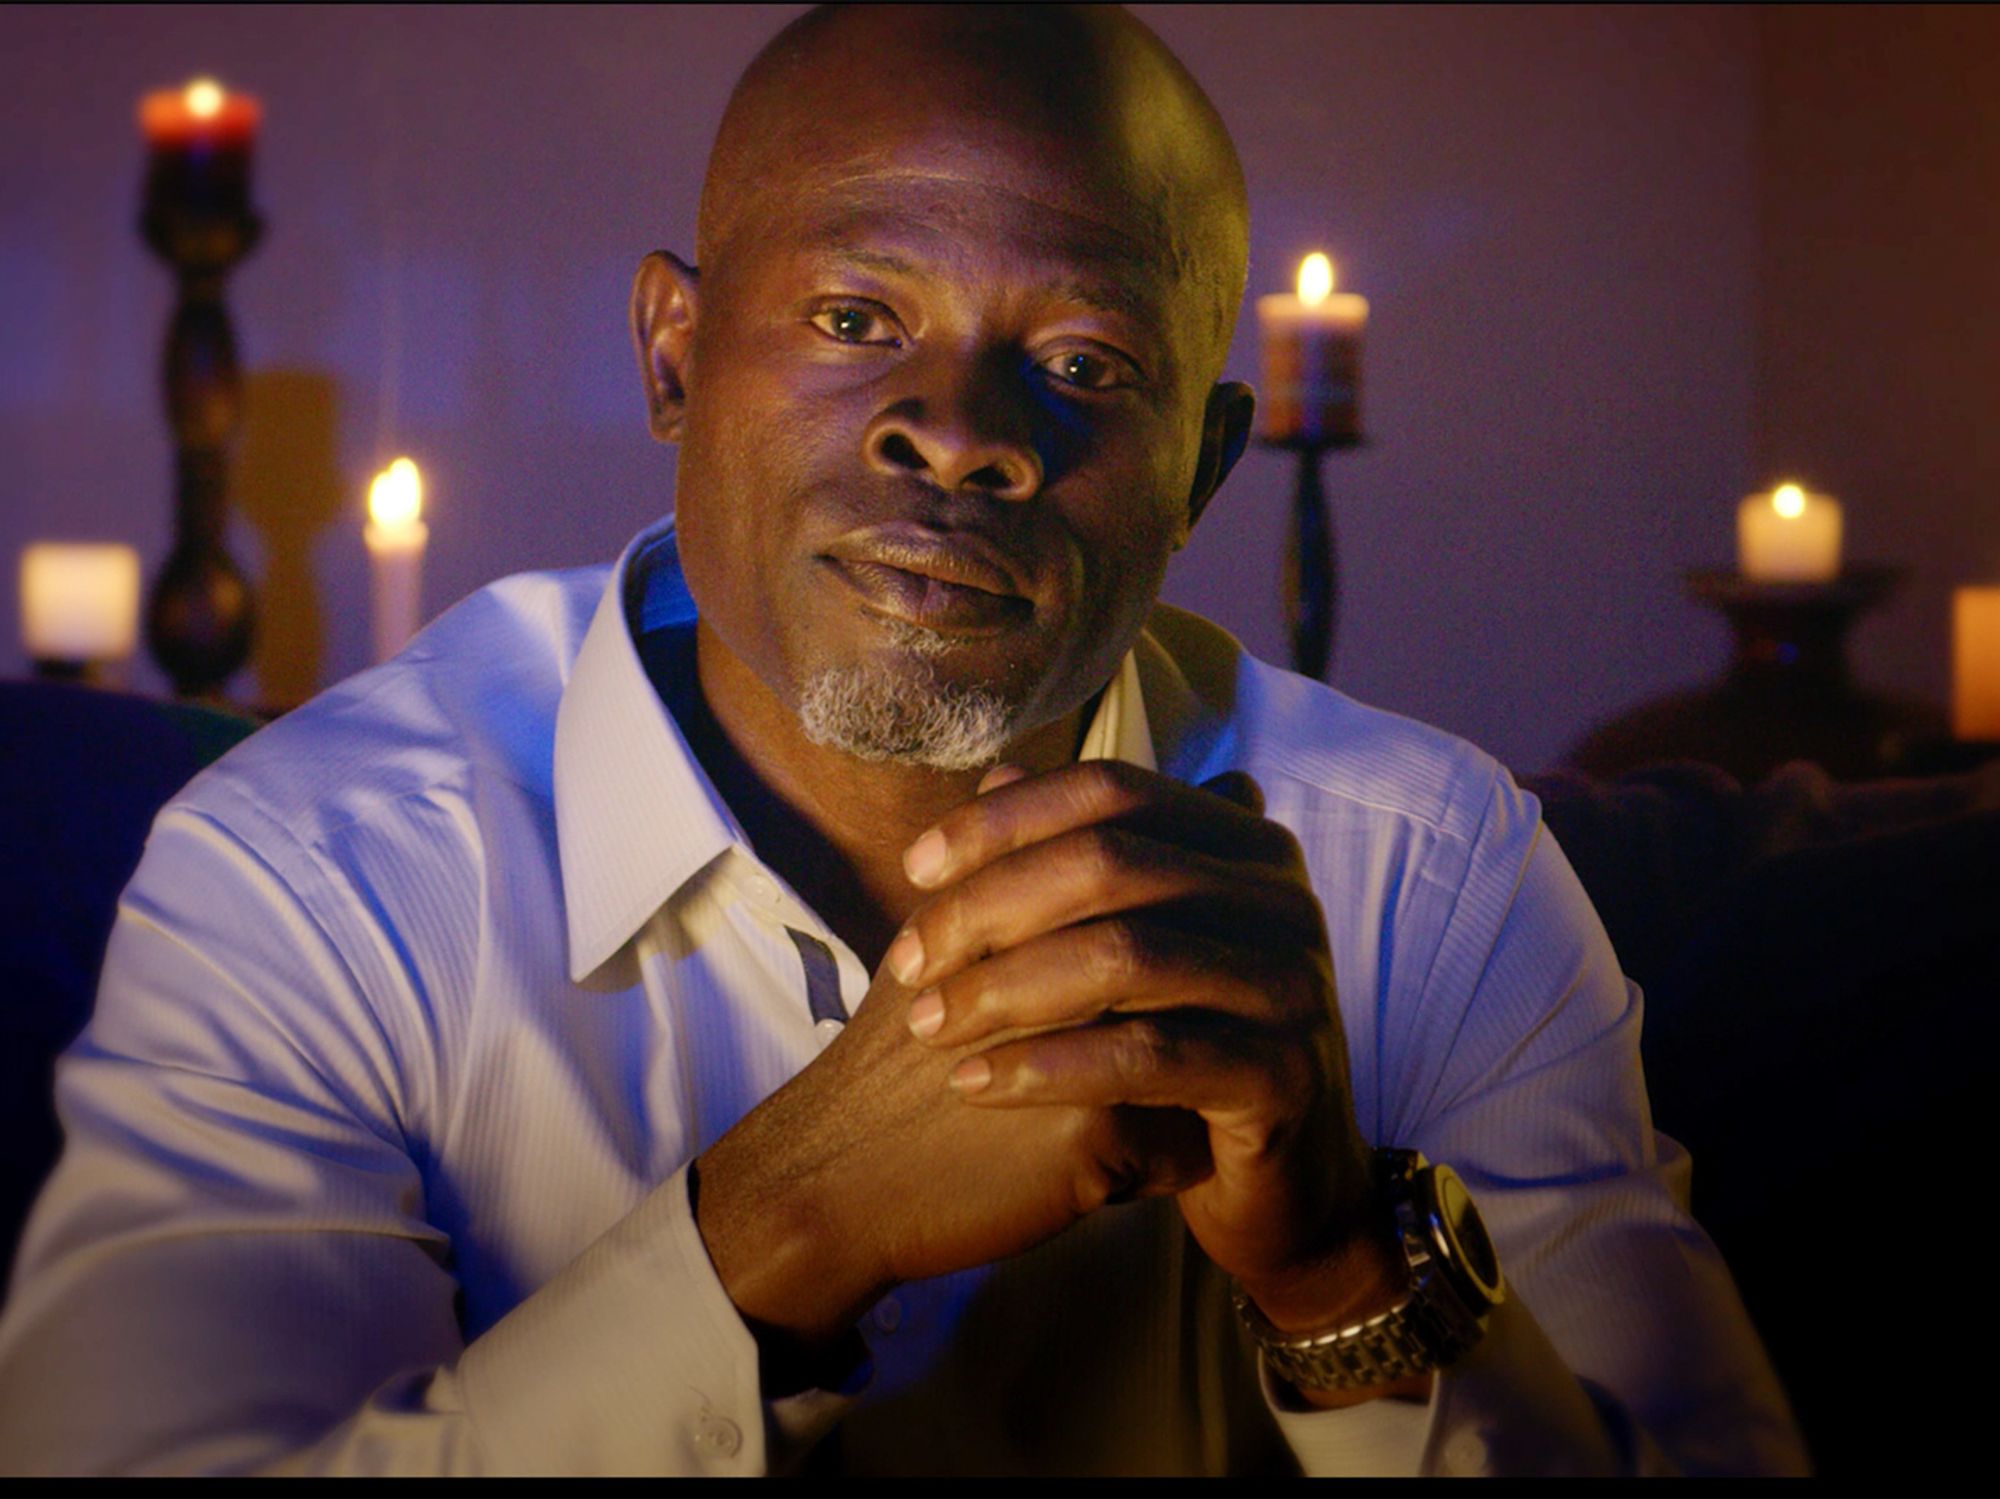 Djimon Honsou looking into camera. Still from in search of voodoo.